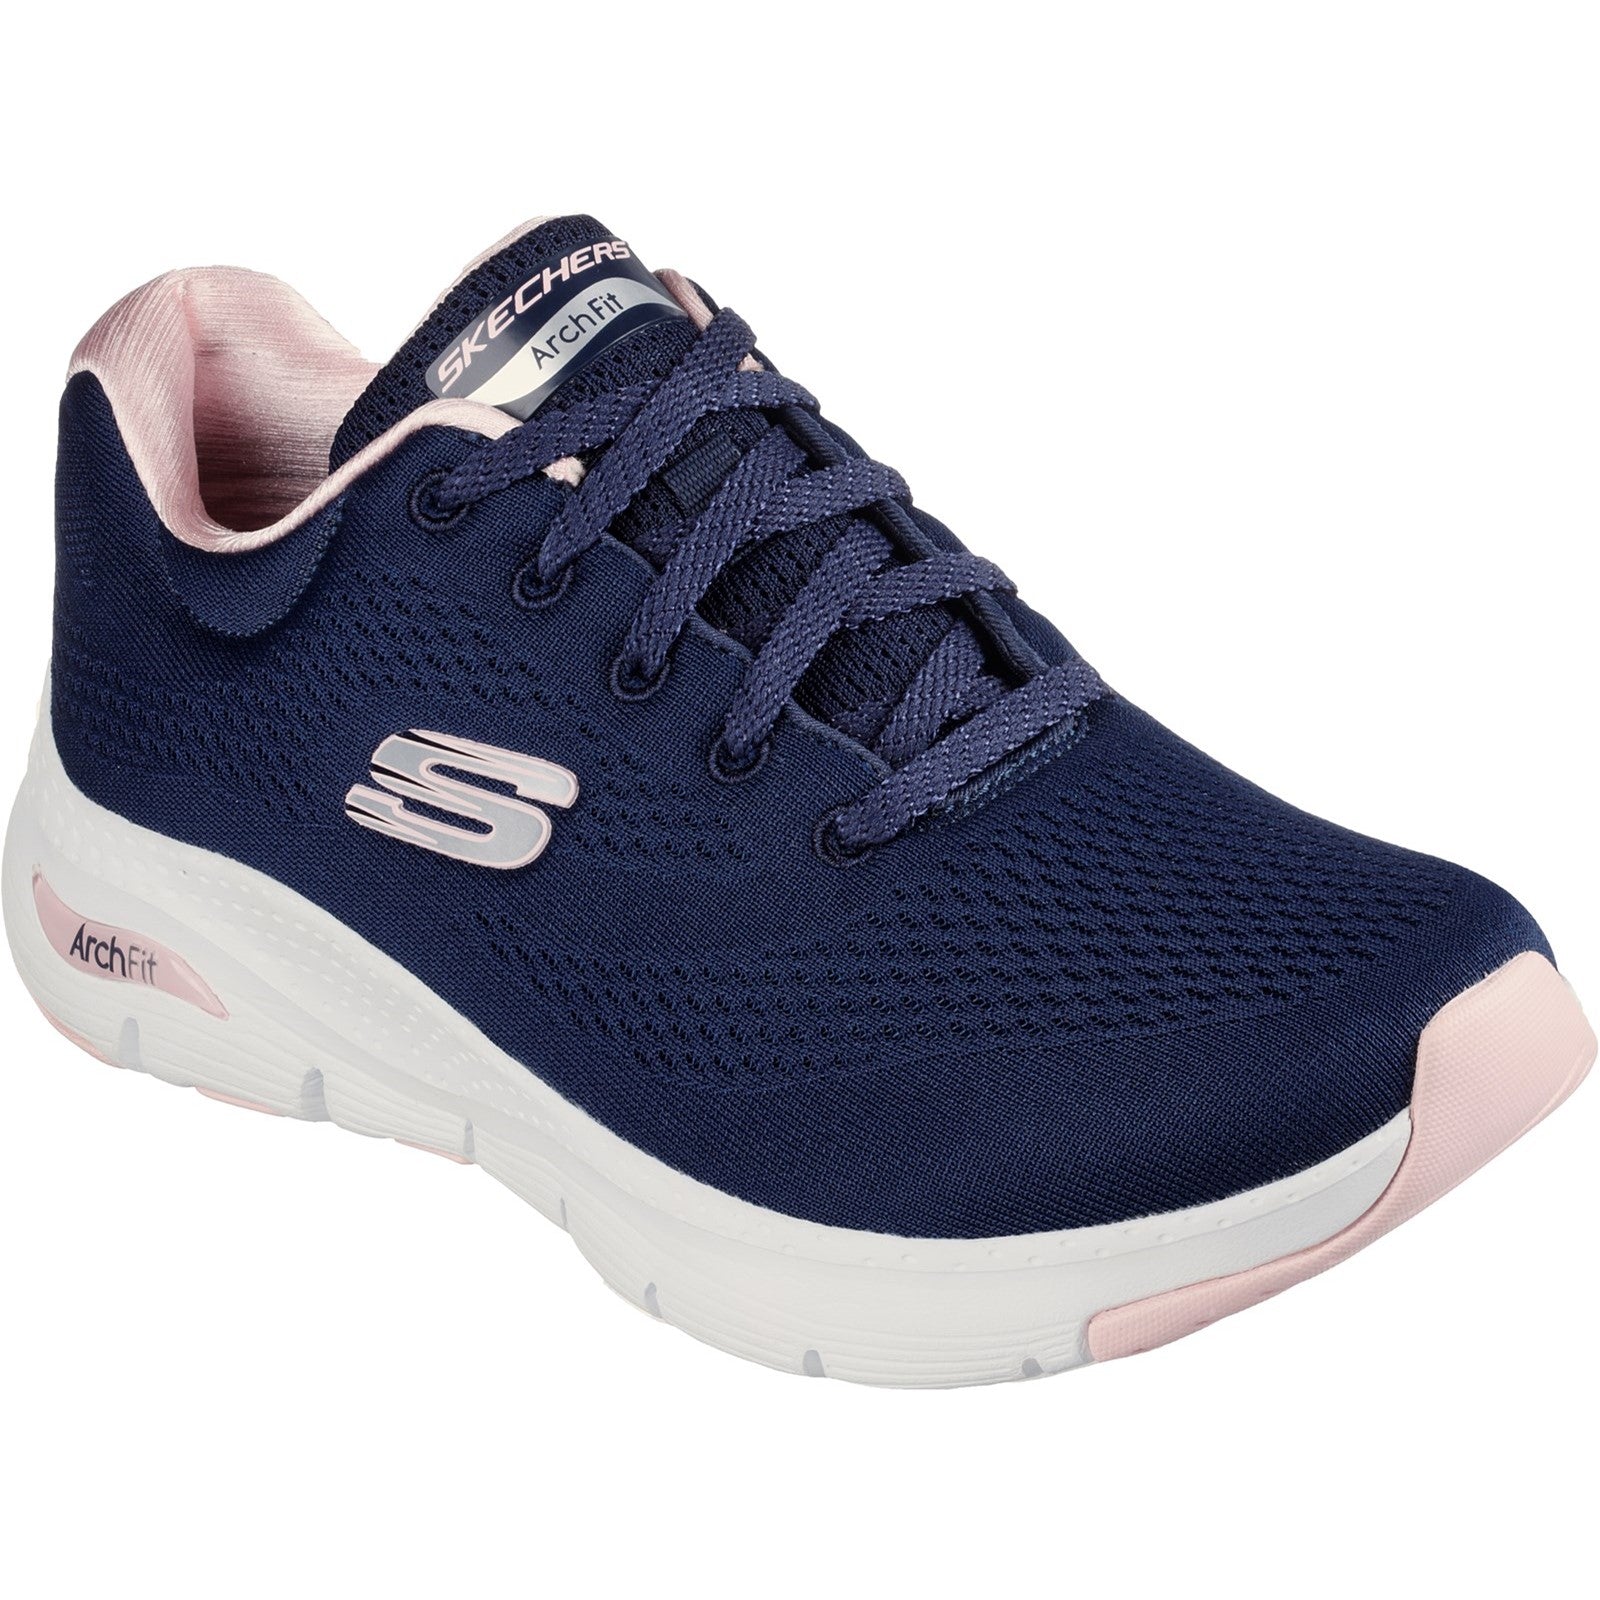 Skechers Womens Arch Fit Sunny Outlook Trainers - Navy